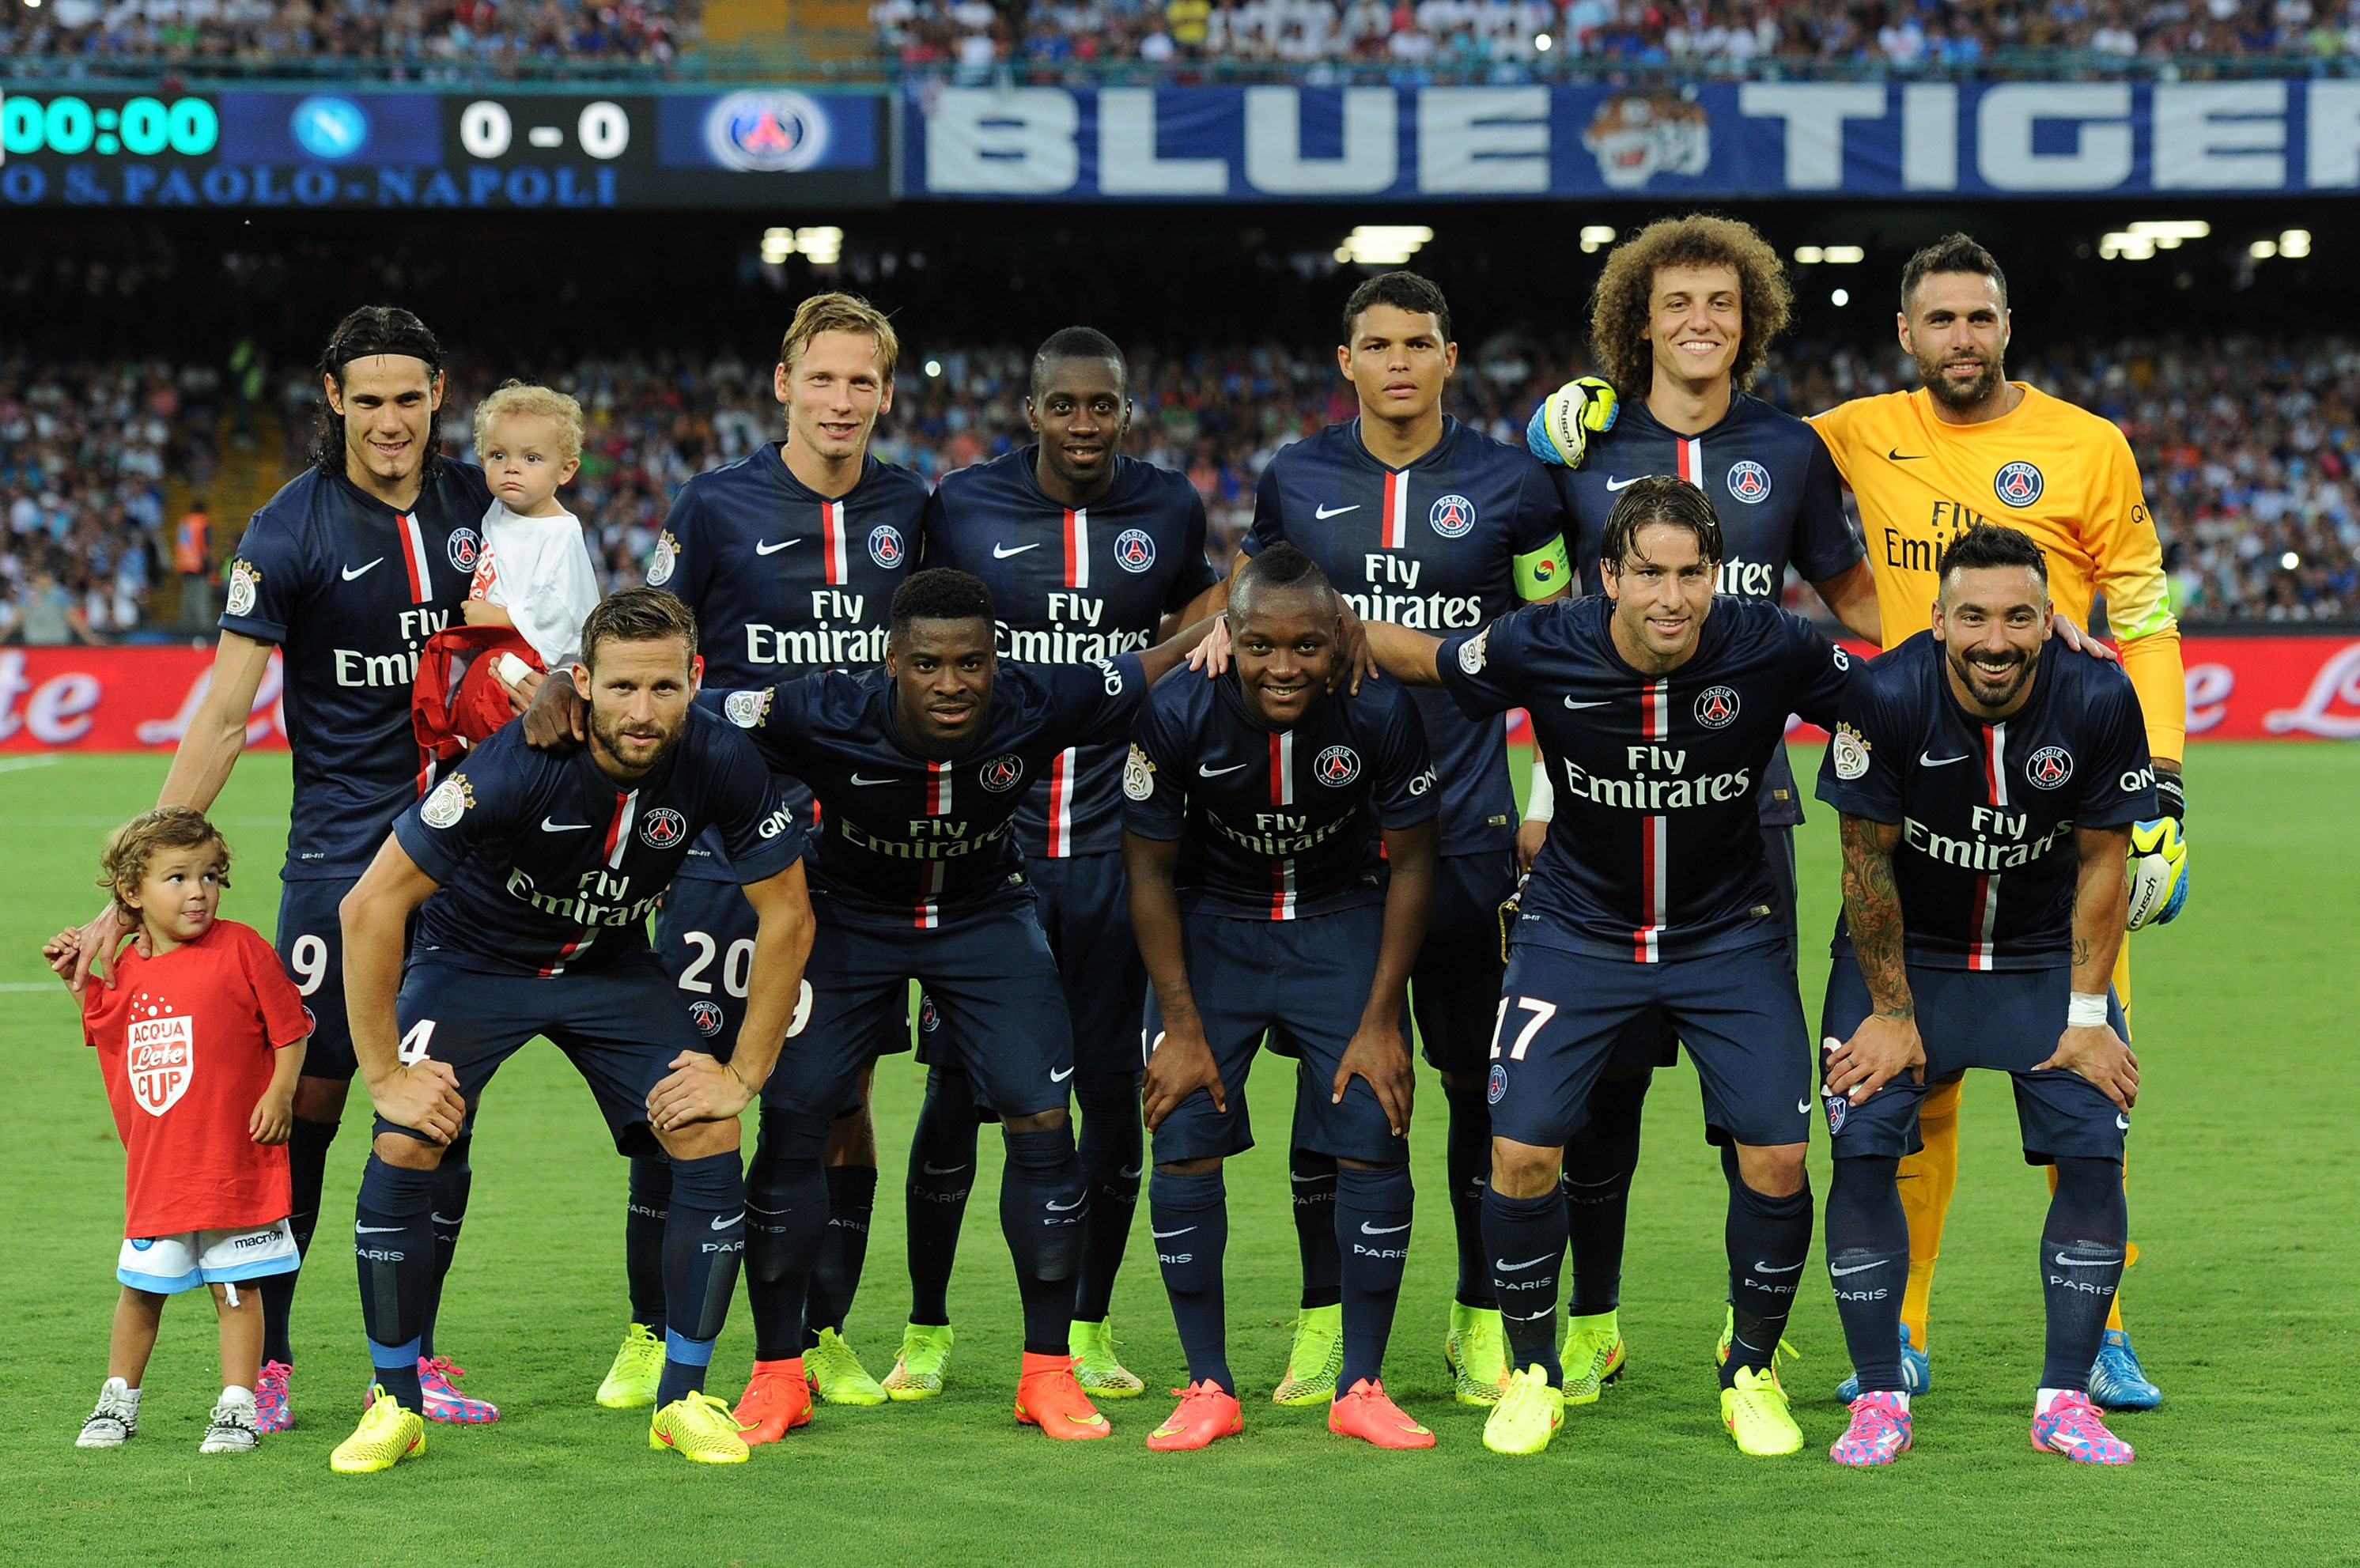 psg vs st etienne date time live stream tv info and preview bleacher report latest news videos and highlights